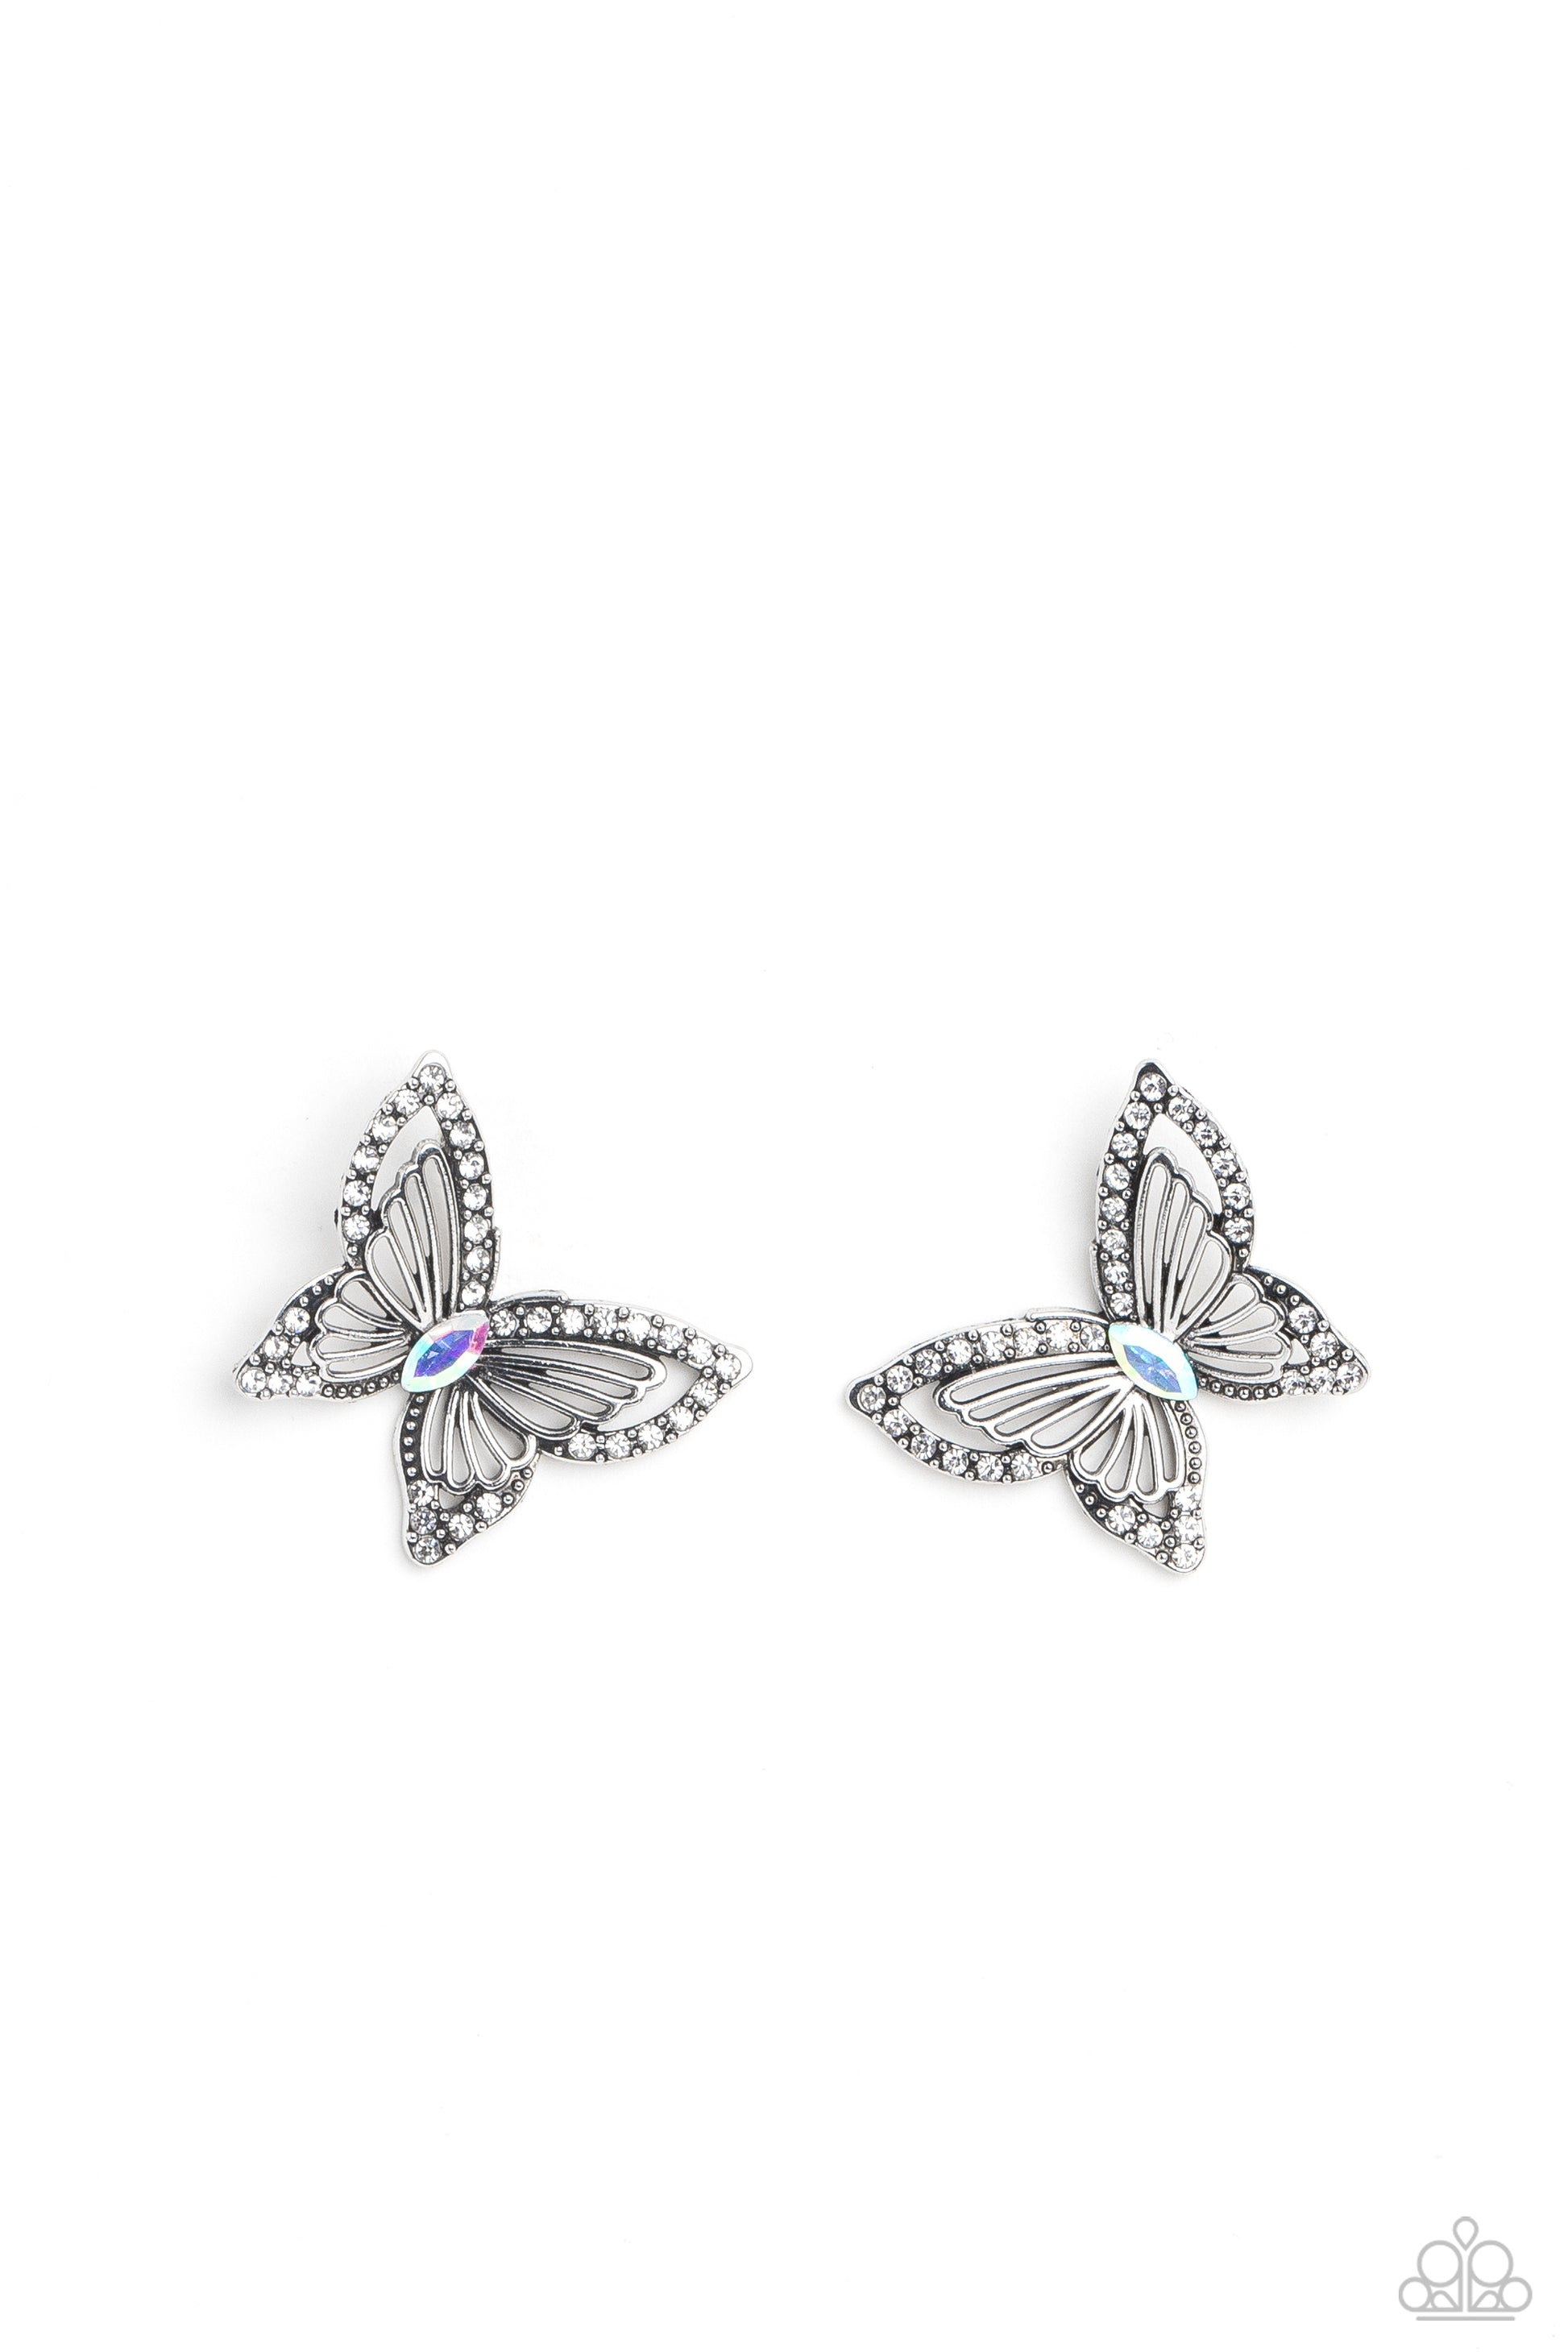 Wispy Wings Multi Butterfly Post Earring - Paparazzi Accessories The outer wings of a white gem-studded butterfly feature inner lacy, airy silver wings that bloom from a marquise-cut iridescent gem center, coalescing into a whimsical 3D butterfly design. Earring attaches to a standard post fitting. Due to its prismatic palette, color may vary. Sold as one pair of post earrings. P5PO-MTXX-100XX